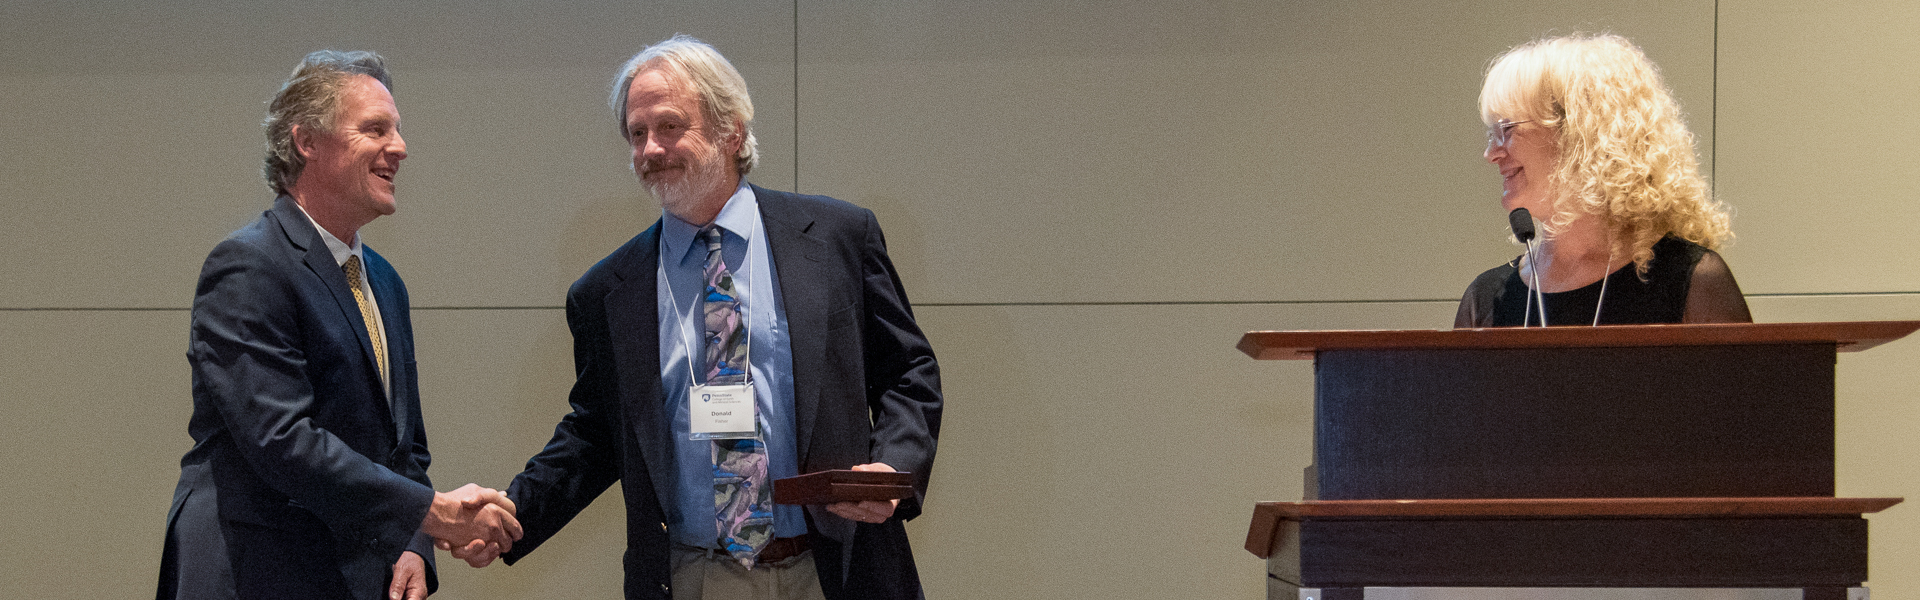 Don Fisher laughing while accepting his award from Dean Kump